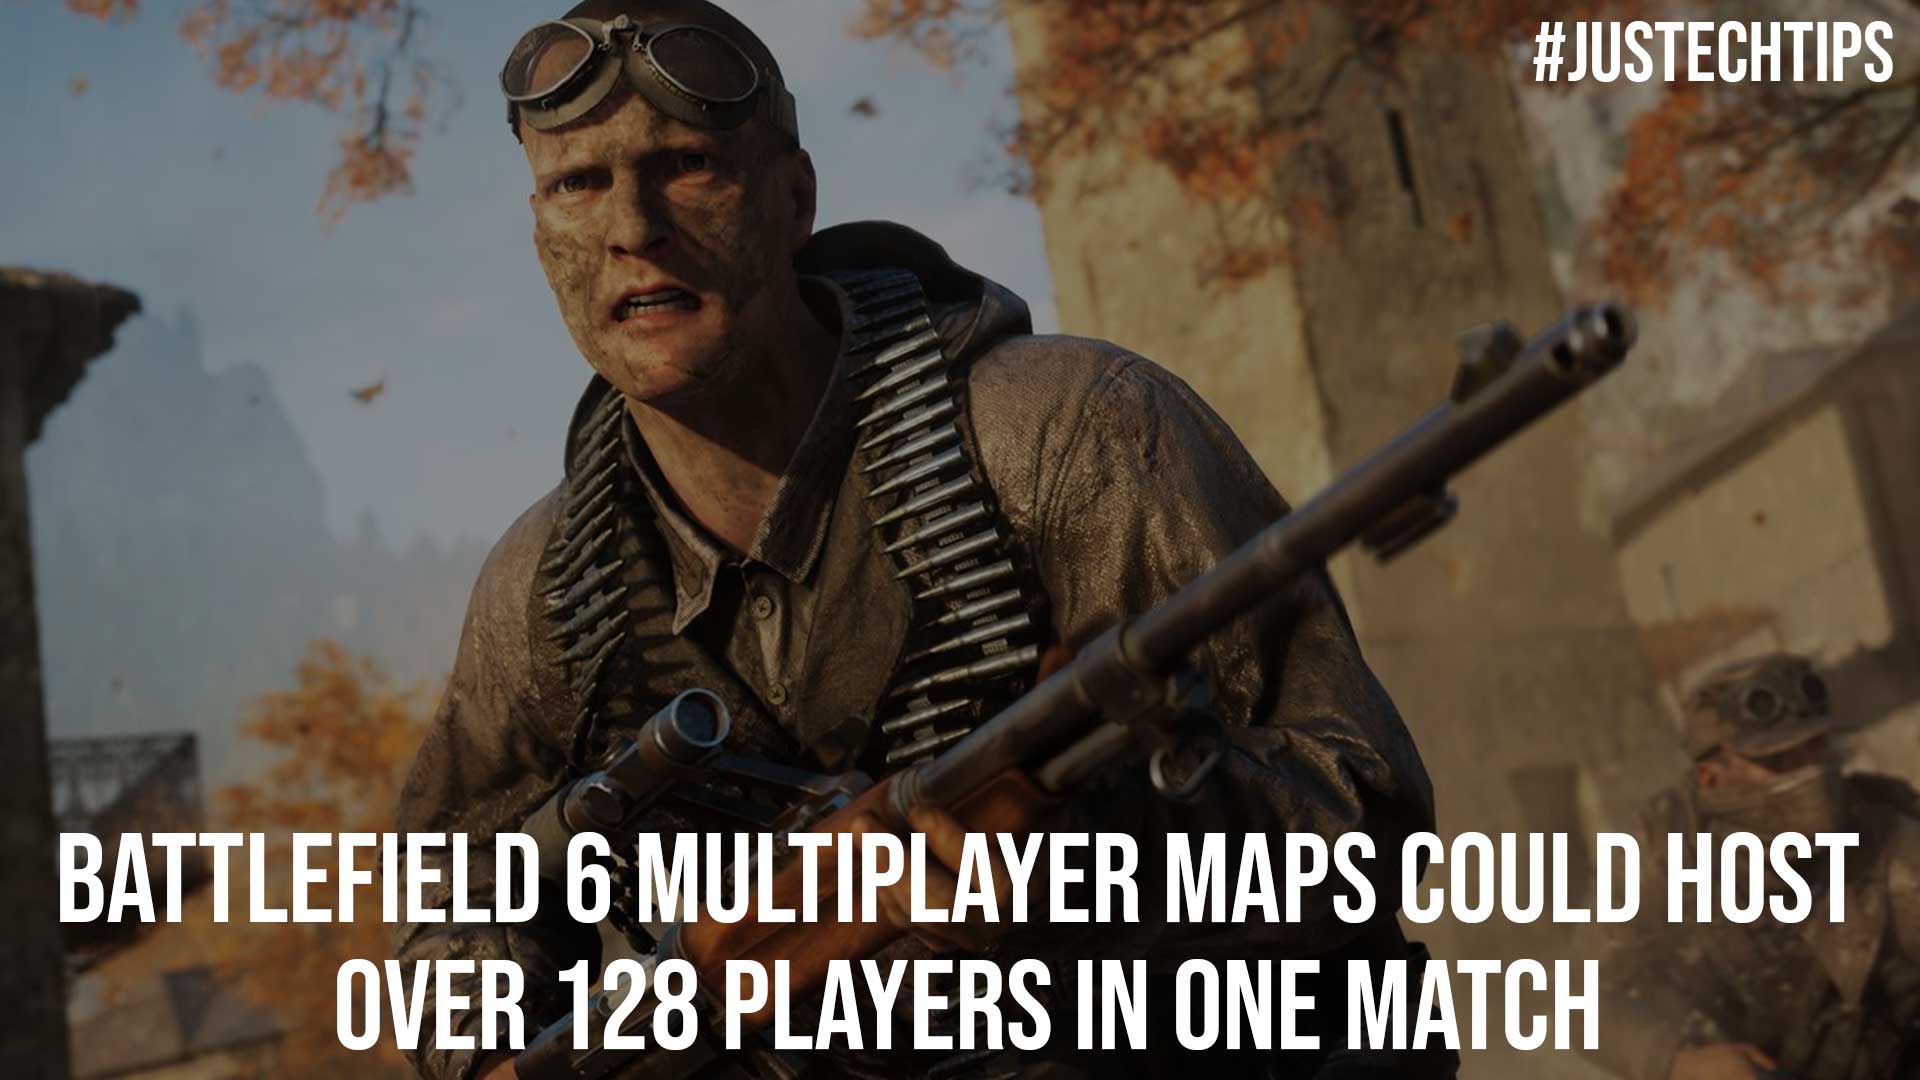 Battlefield 6 Multiplayer Maps Could Host Over 128 Players in One Match